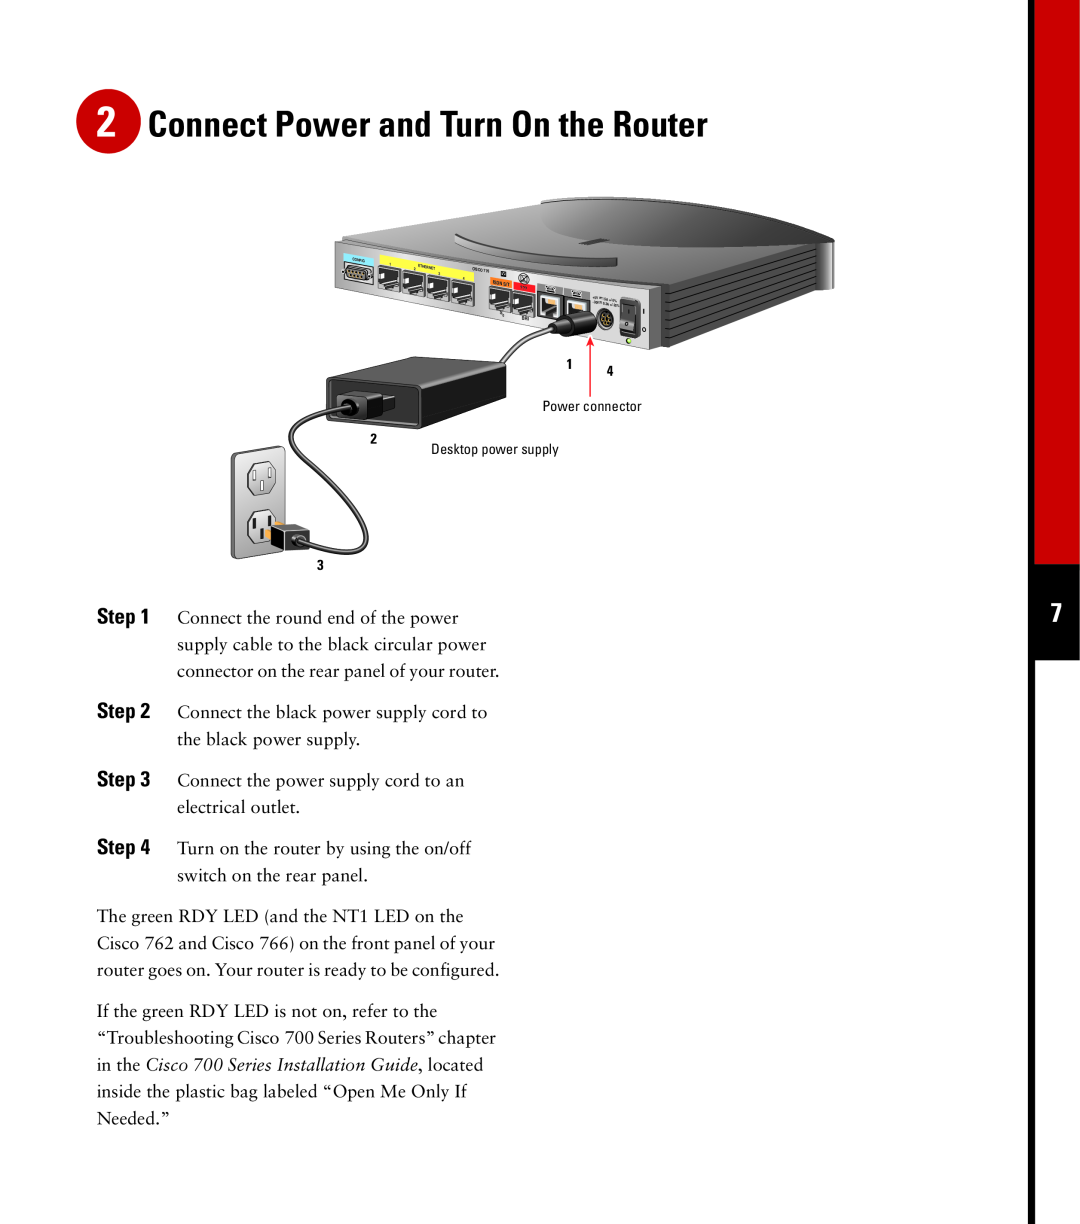 Cisco Systems 760 quick start Connect Power and Turn On the Router 